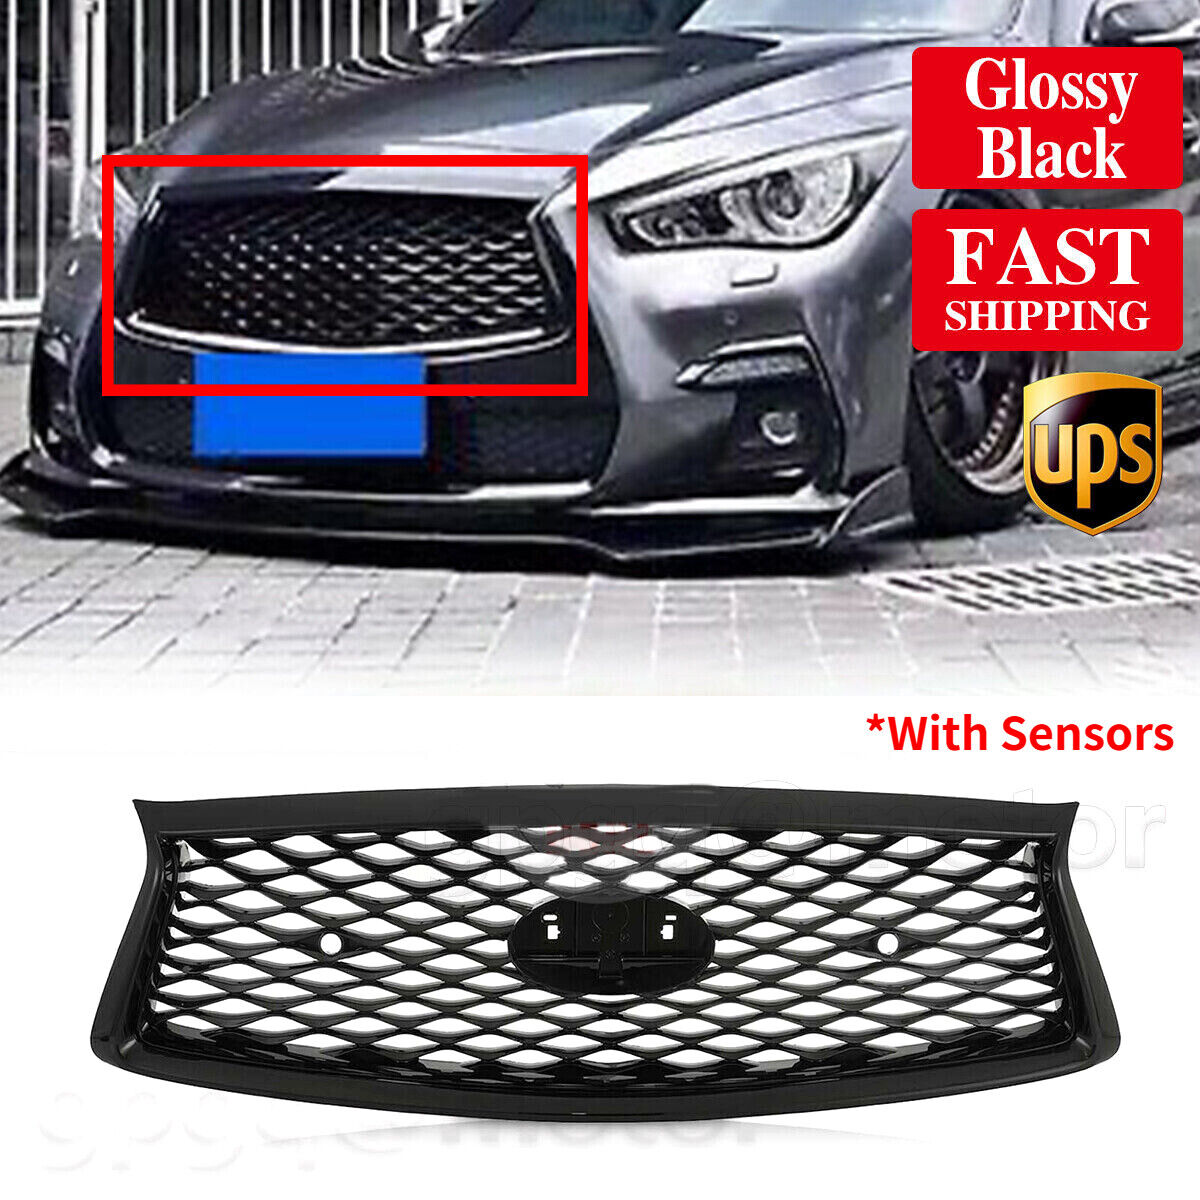 Gloss Black Front Bumper Grille For Infiniti Q50 2018-2021 2019 Replacement